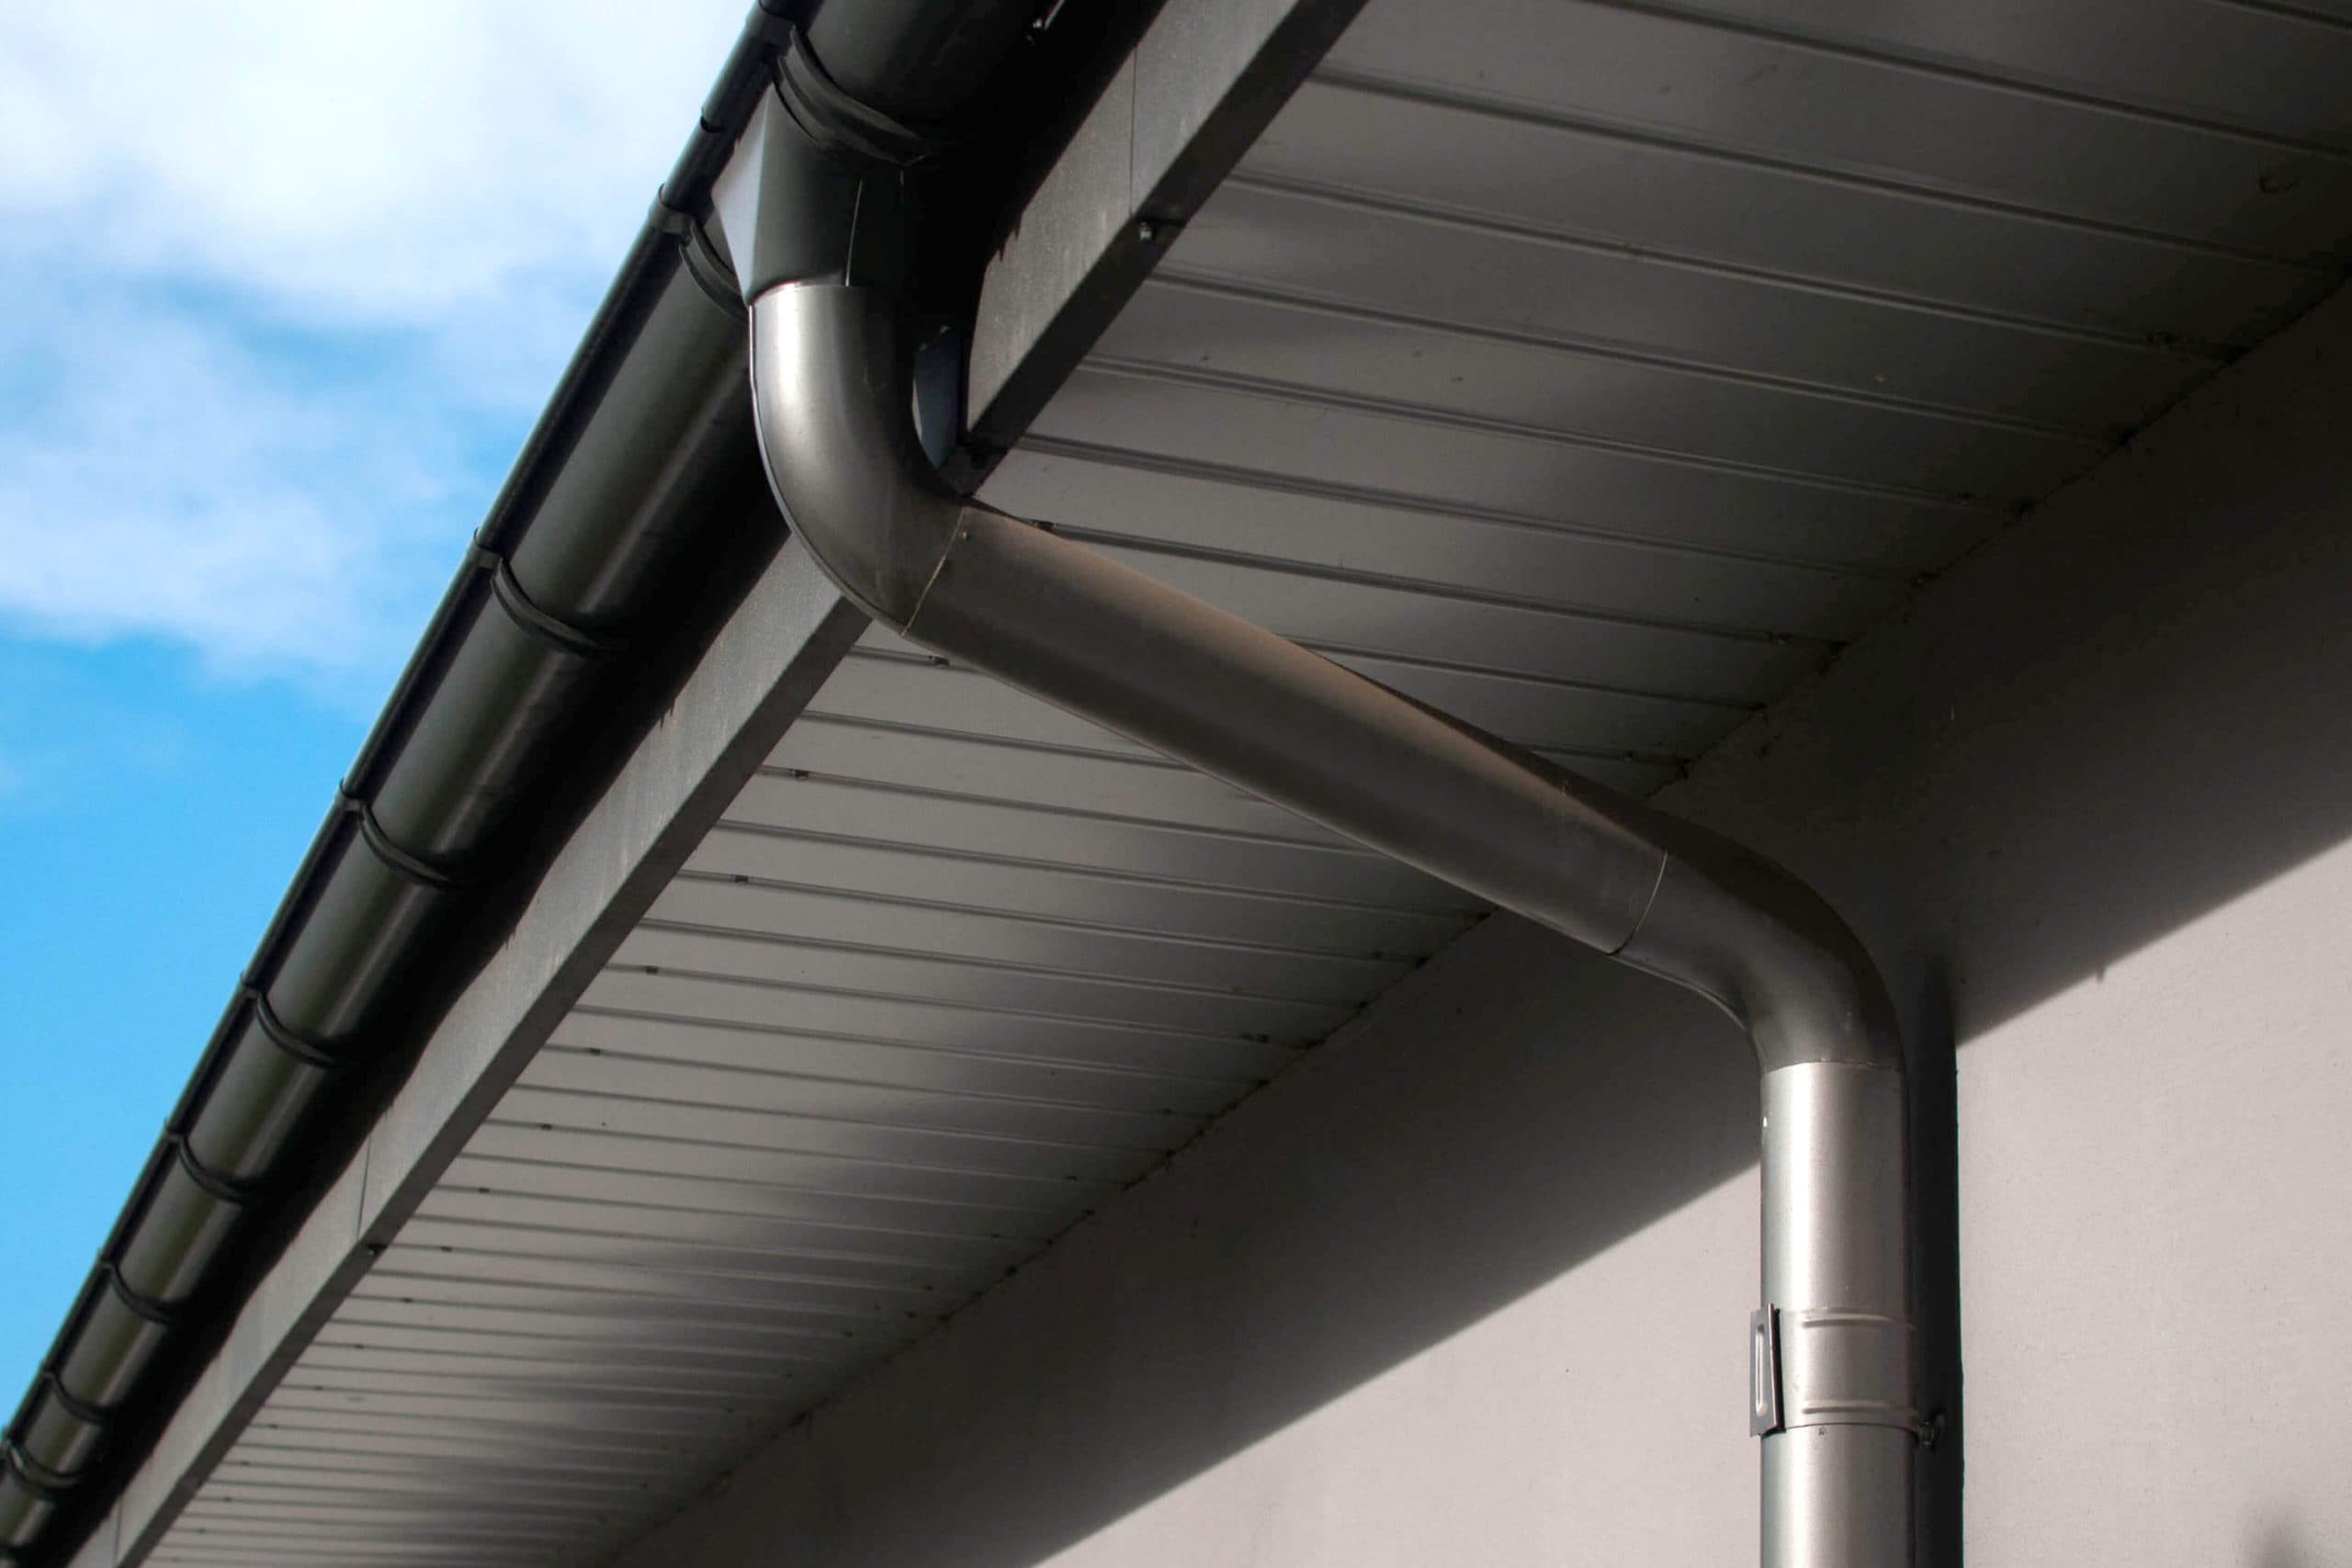 Reliable and affordable Galvanized gutters installation in Dayton